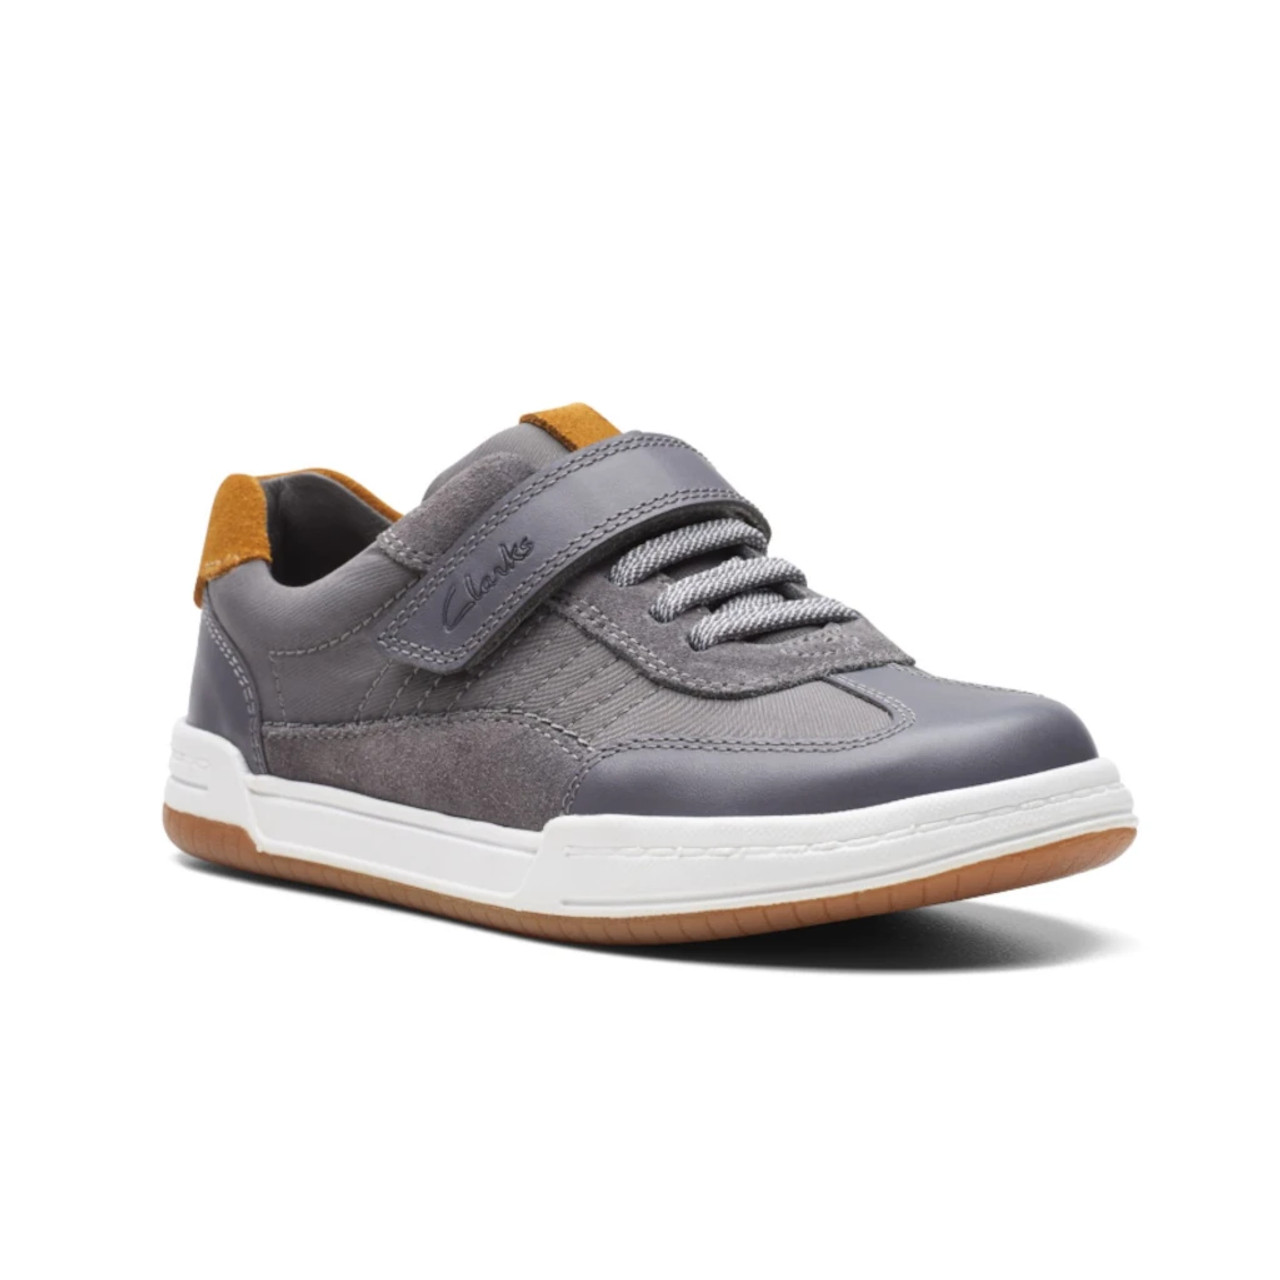 lade notifikation Undertrykke Clarks Fawn Family Grey 26175115 G Fit Kids Shoes